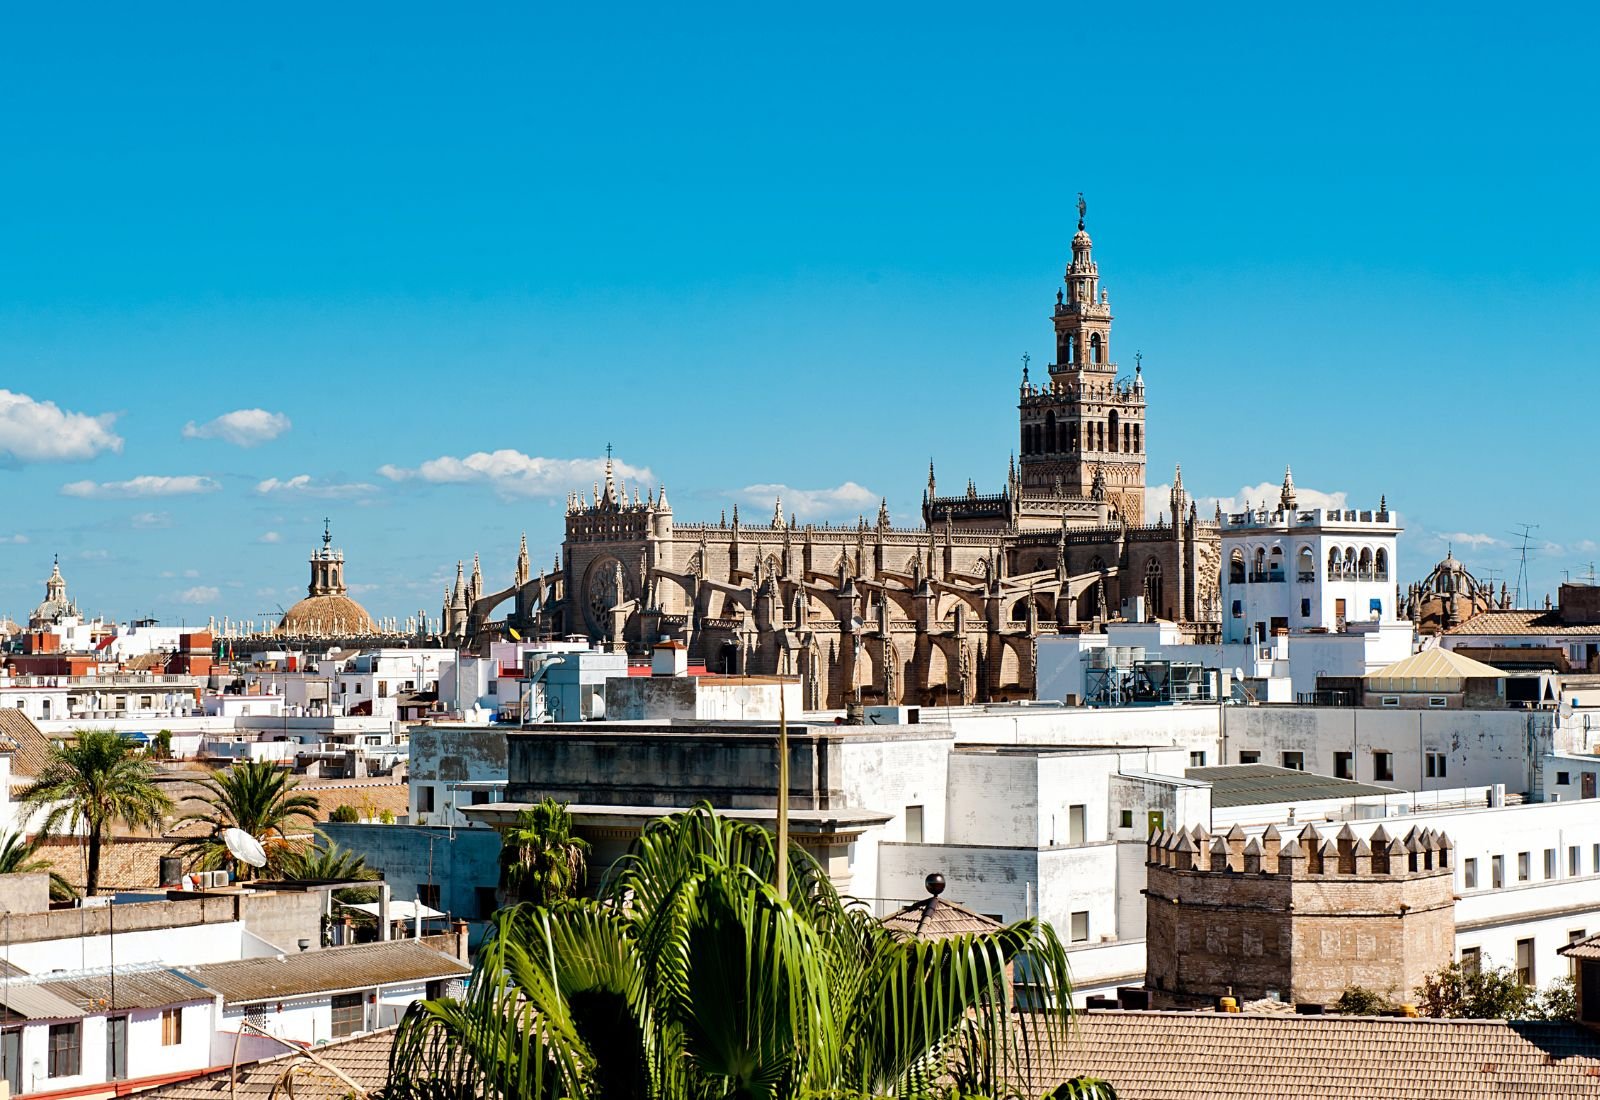 A photo of the Seville Cathedral from a distance.